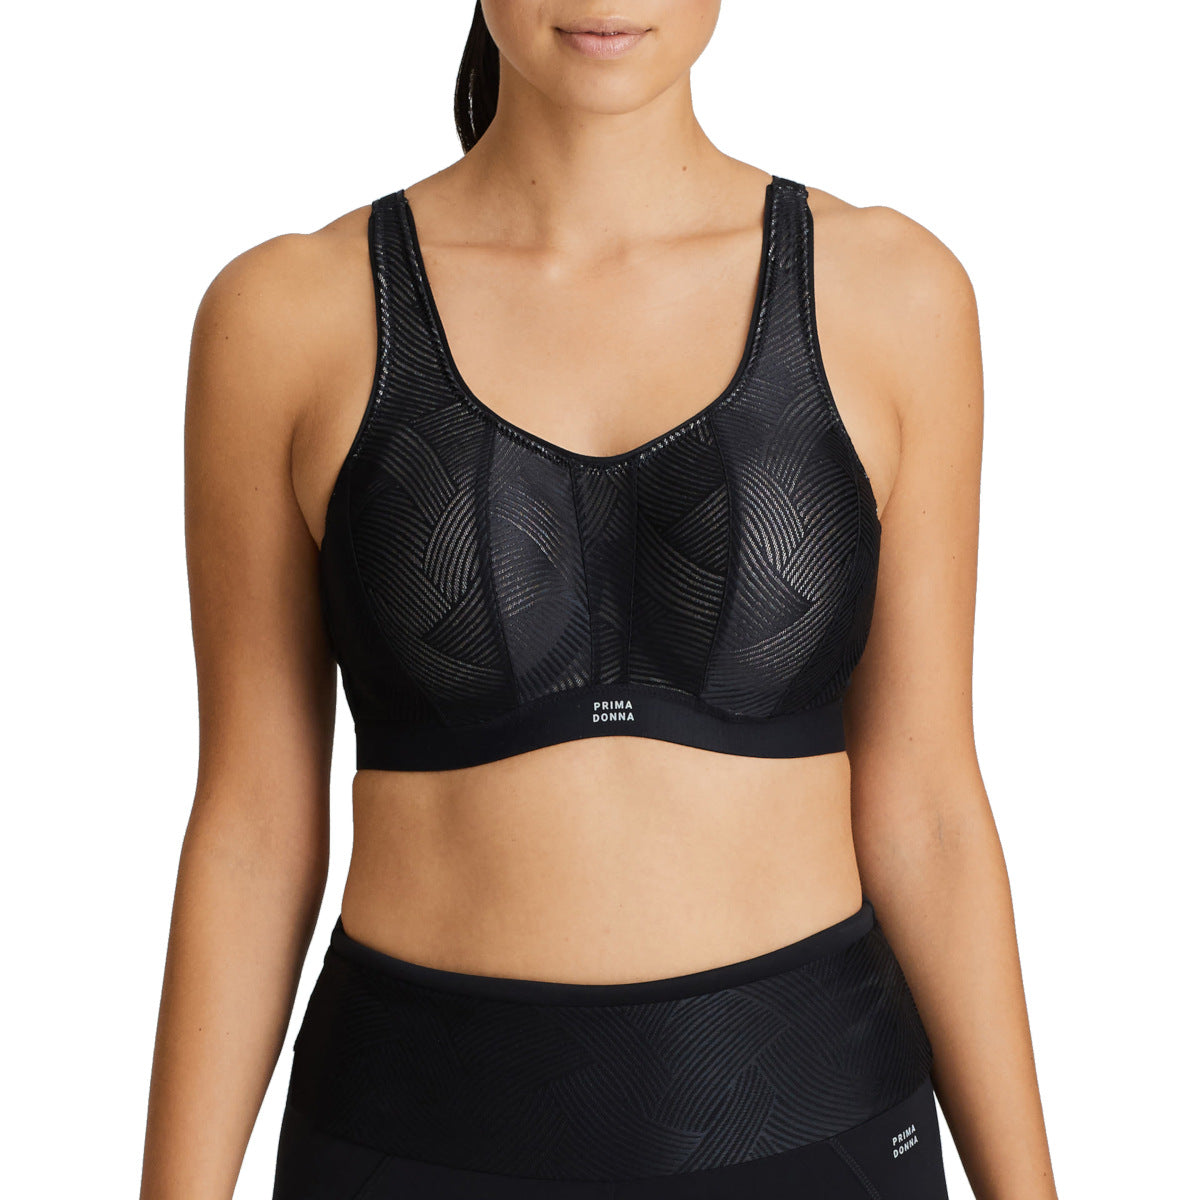 Sport by Cacique 40DD sports bra